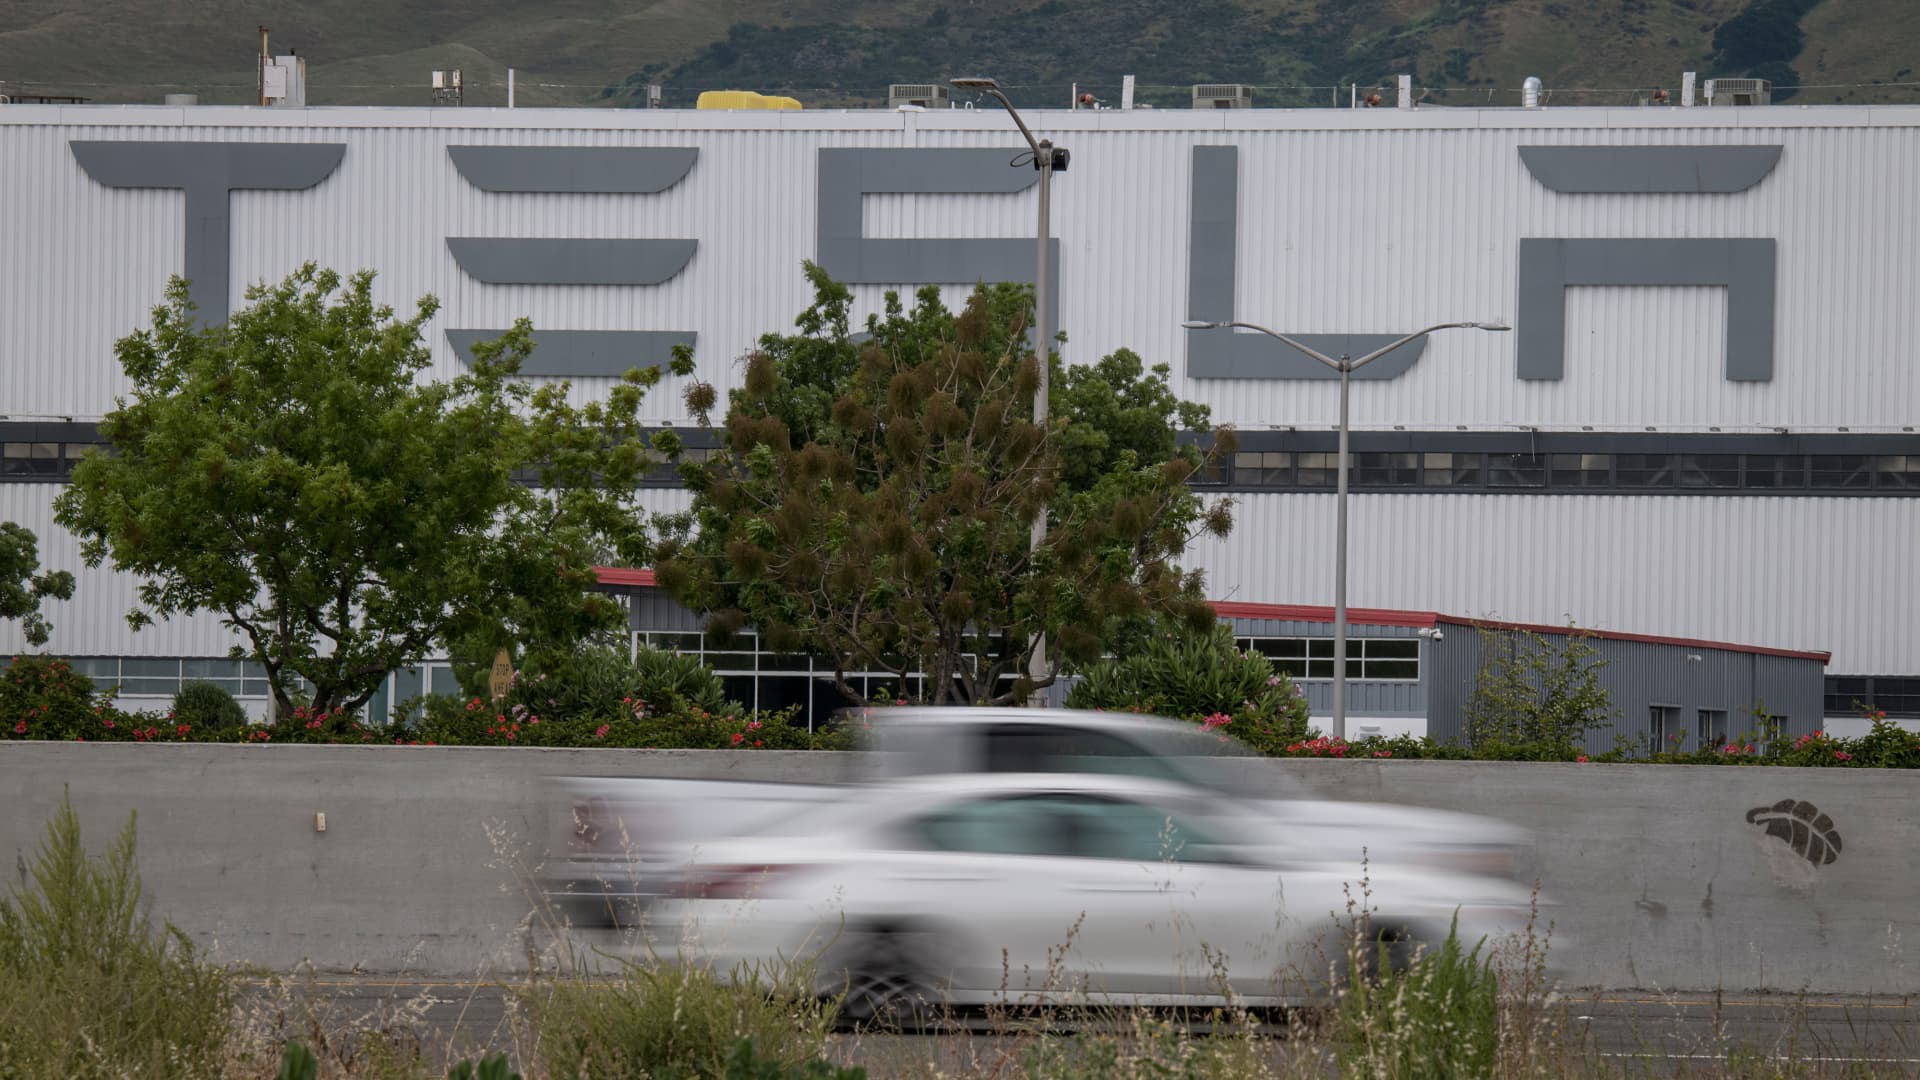 EEOC sues Tesla, alleging widespread racist harassment of Black workers, retaliation against those who spoke out